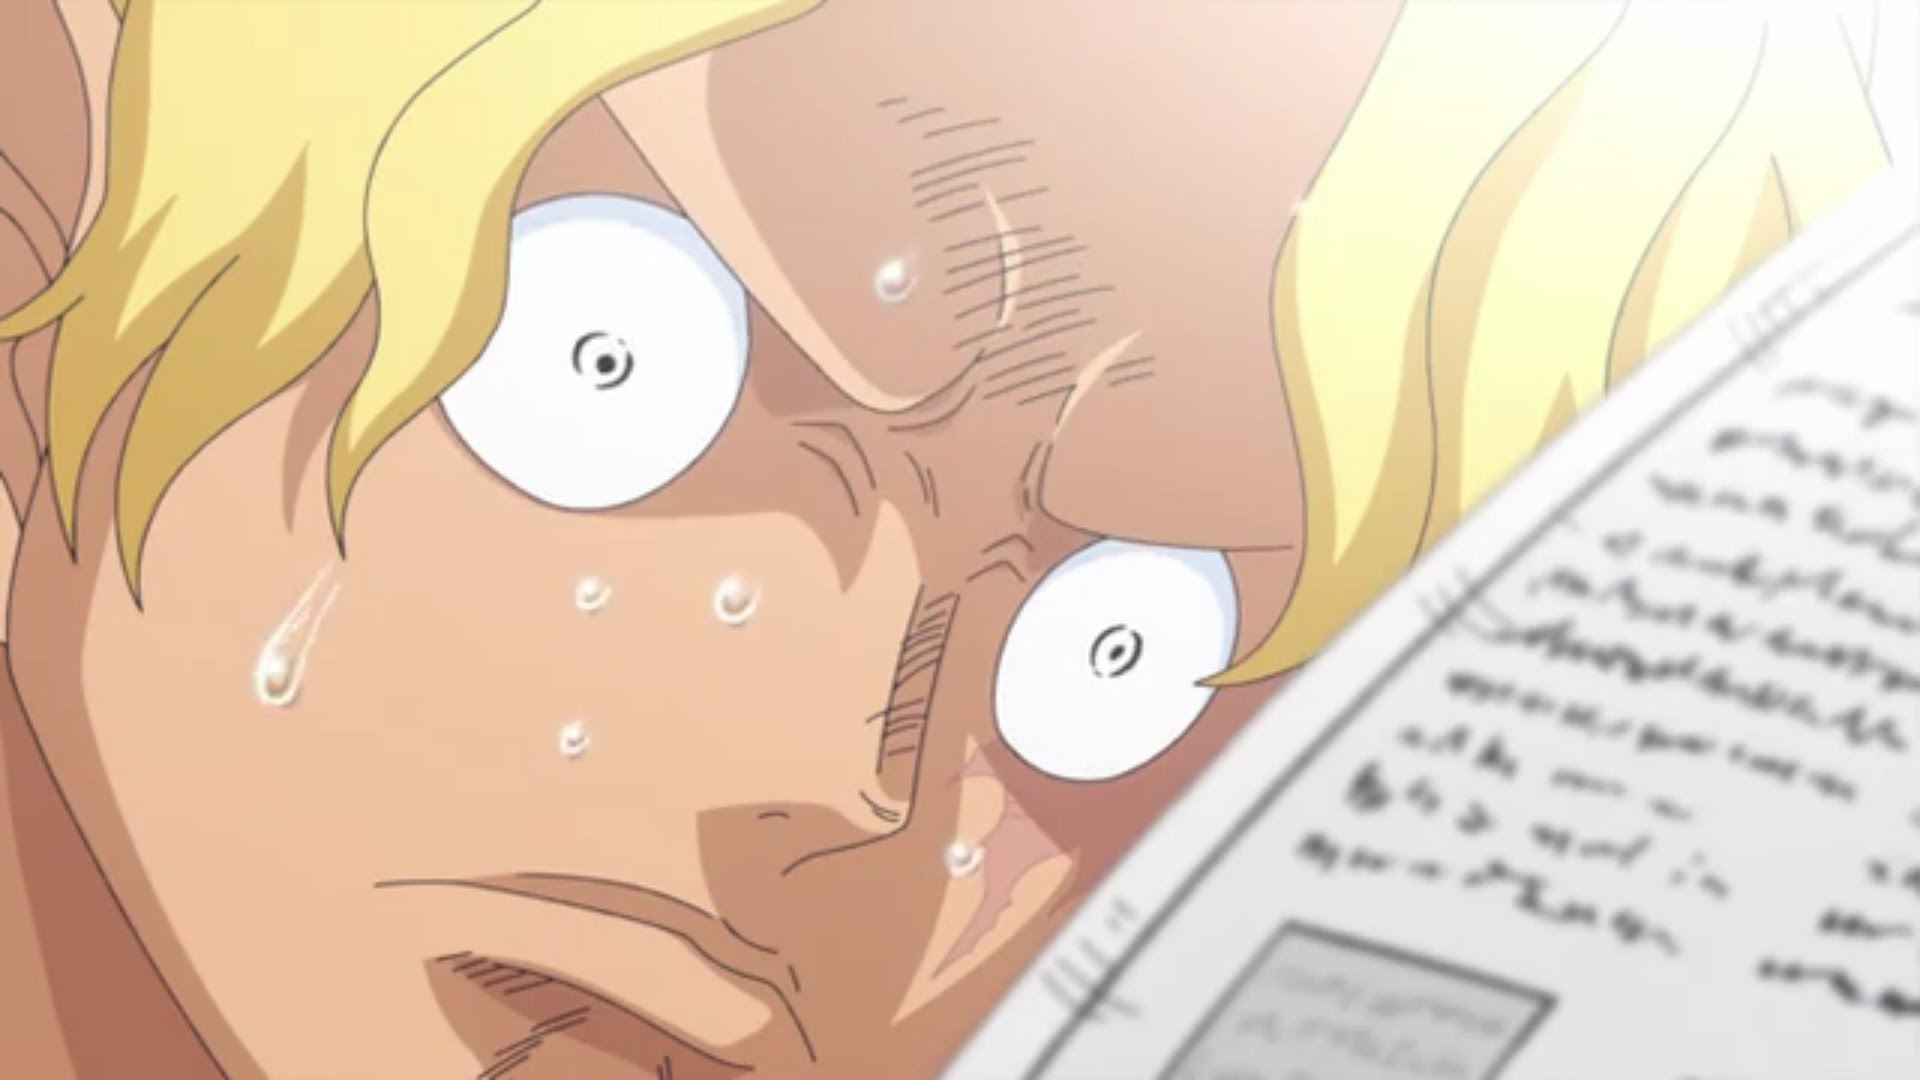 12 Things You Should Know About Sabo - One Piece